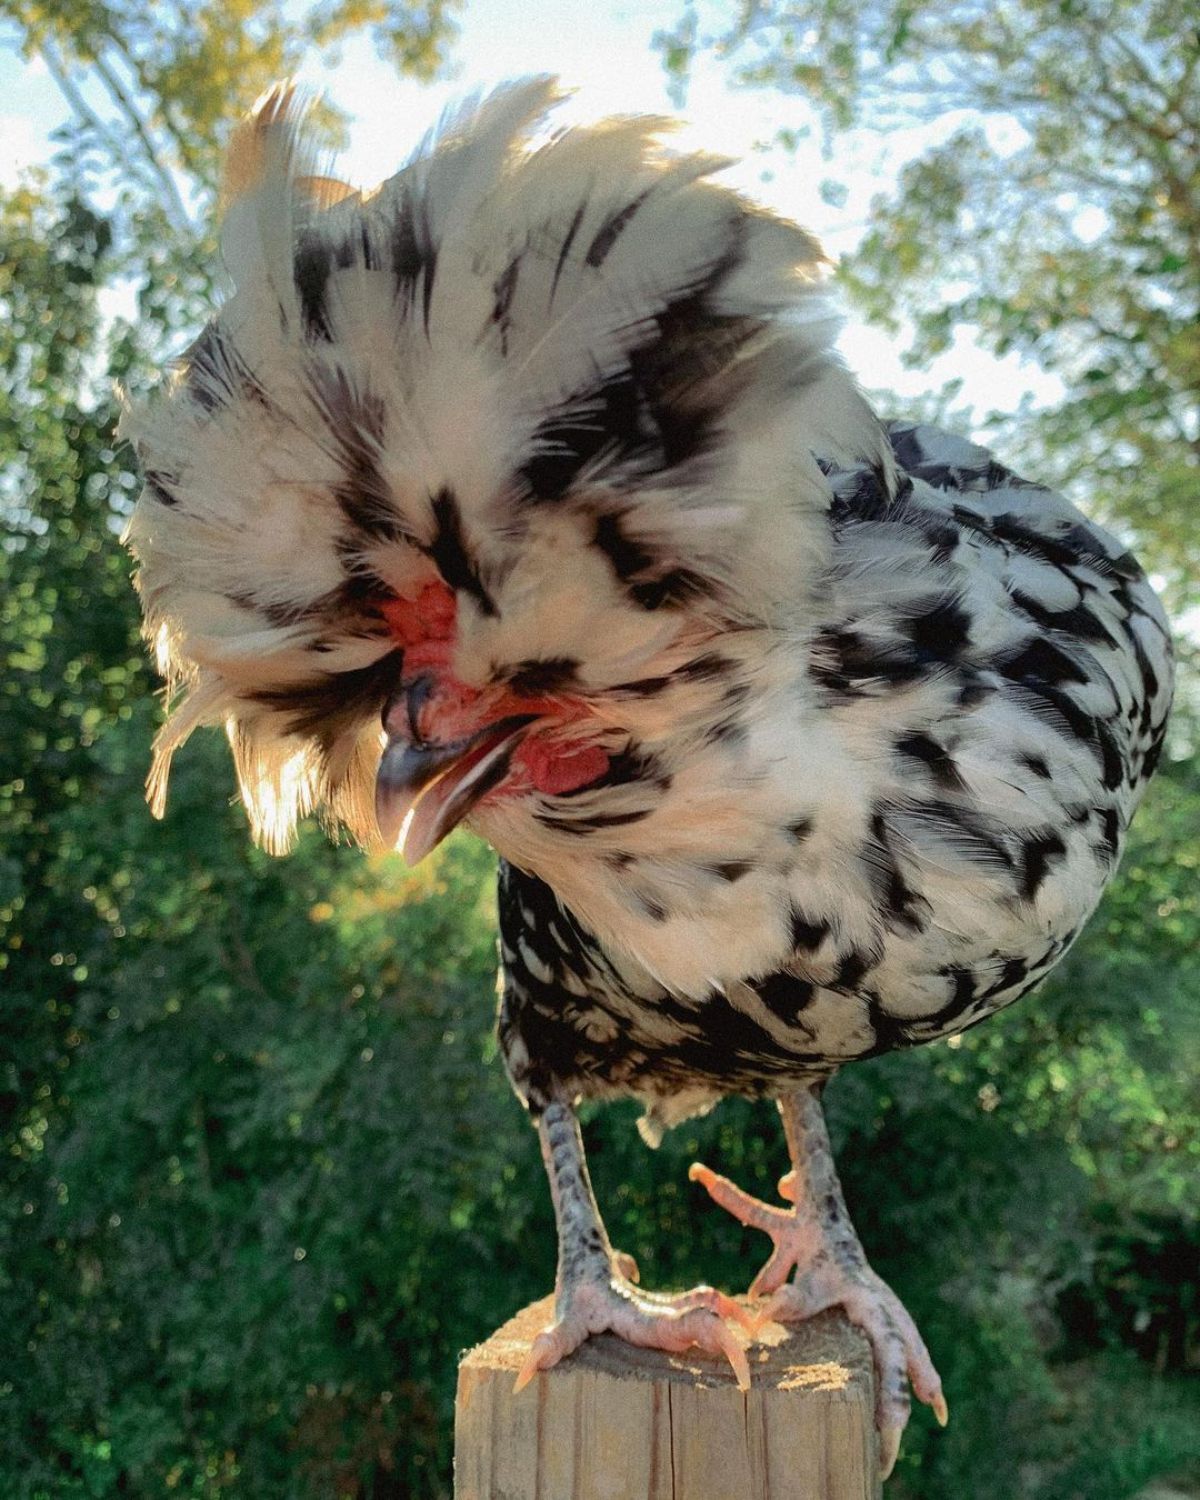 An adorable Mottled Houdan hen perched on a wooden pole.